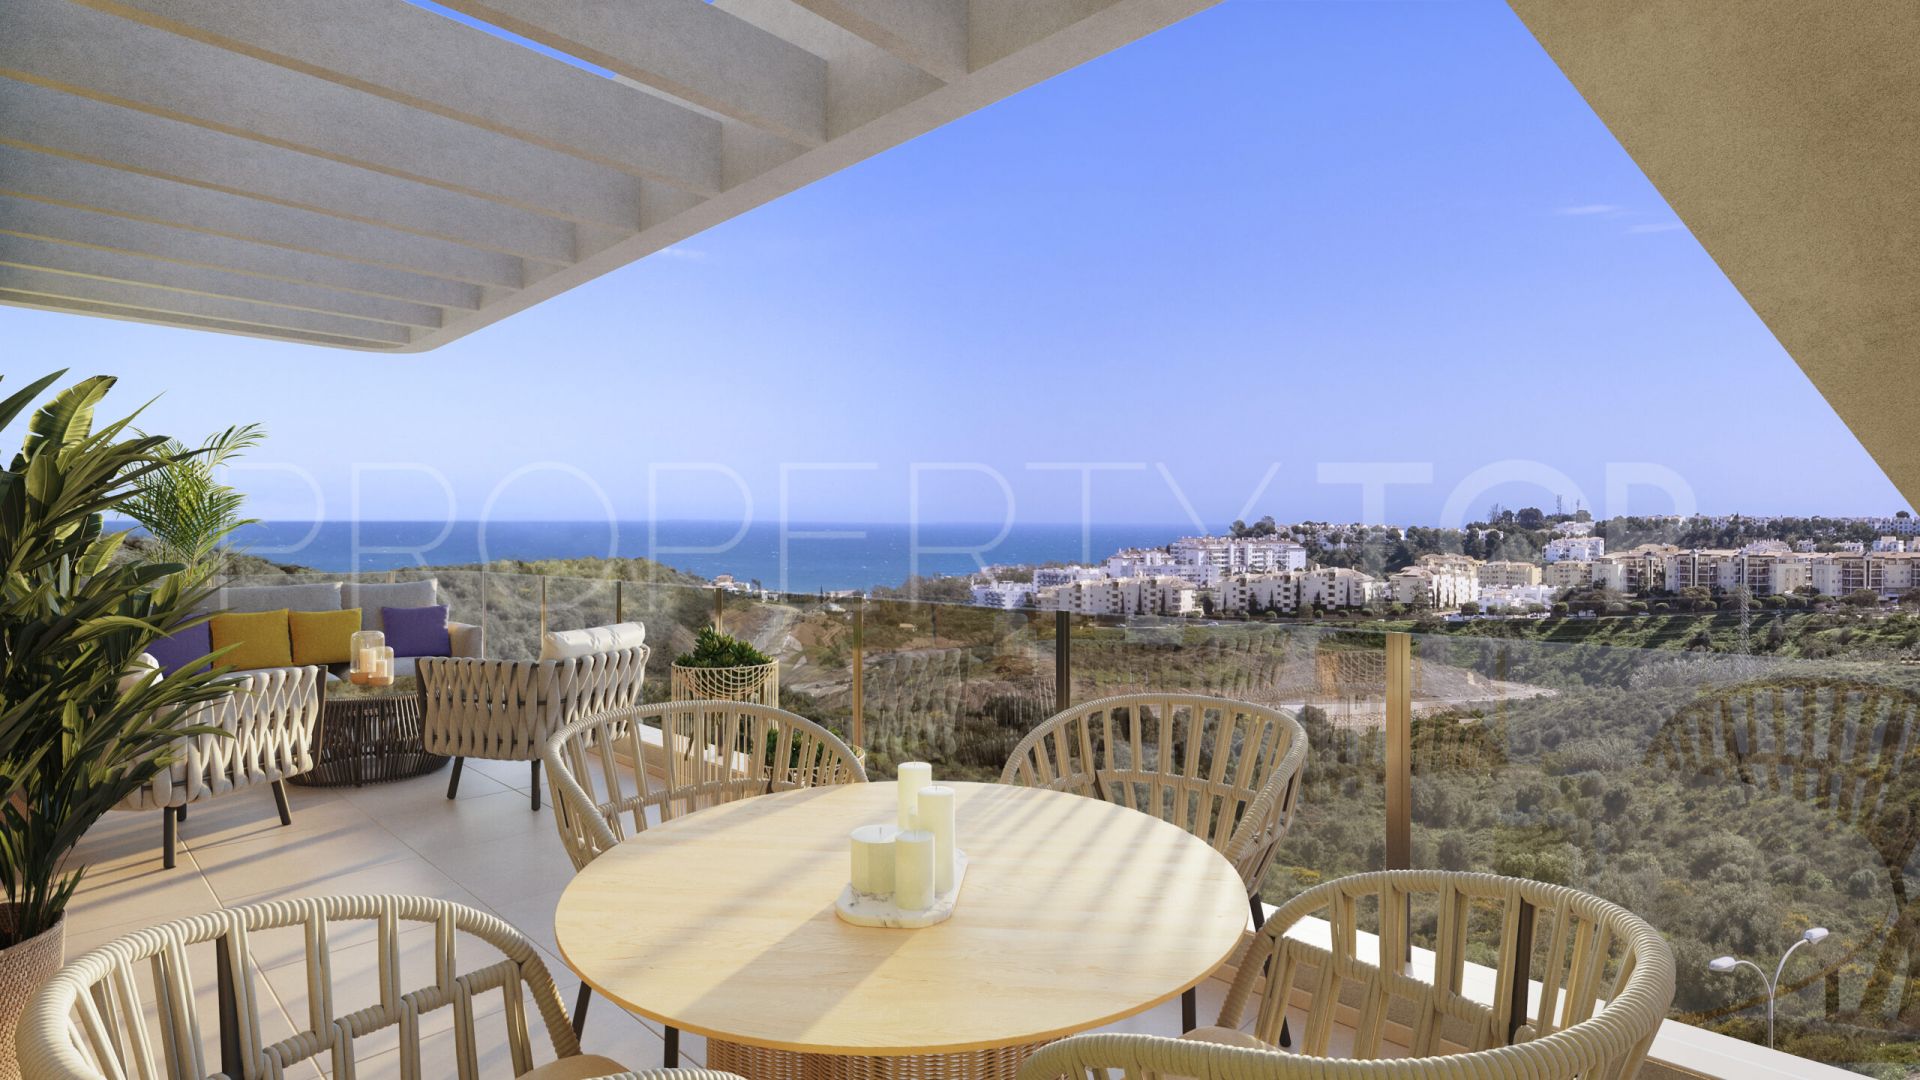 2 bedrooms penthouse for sale in Calanova Golf